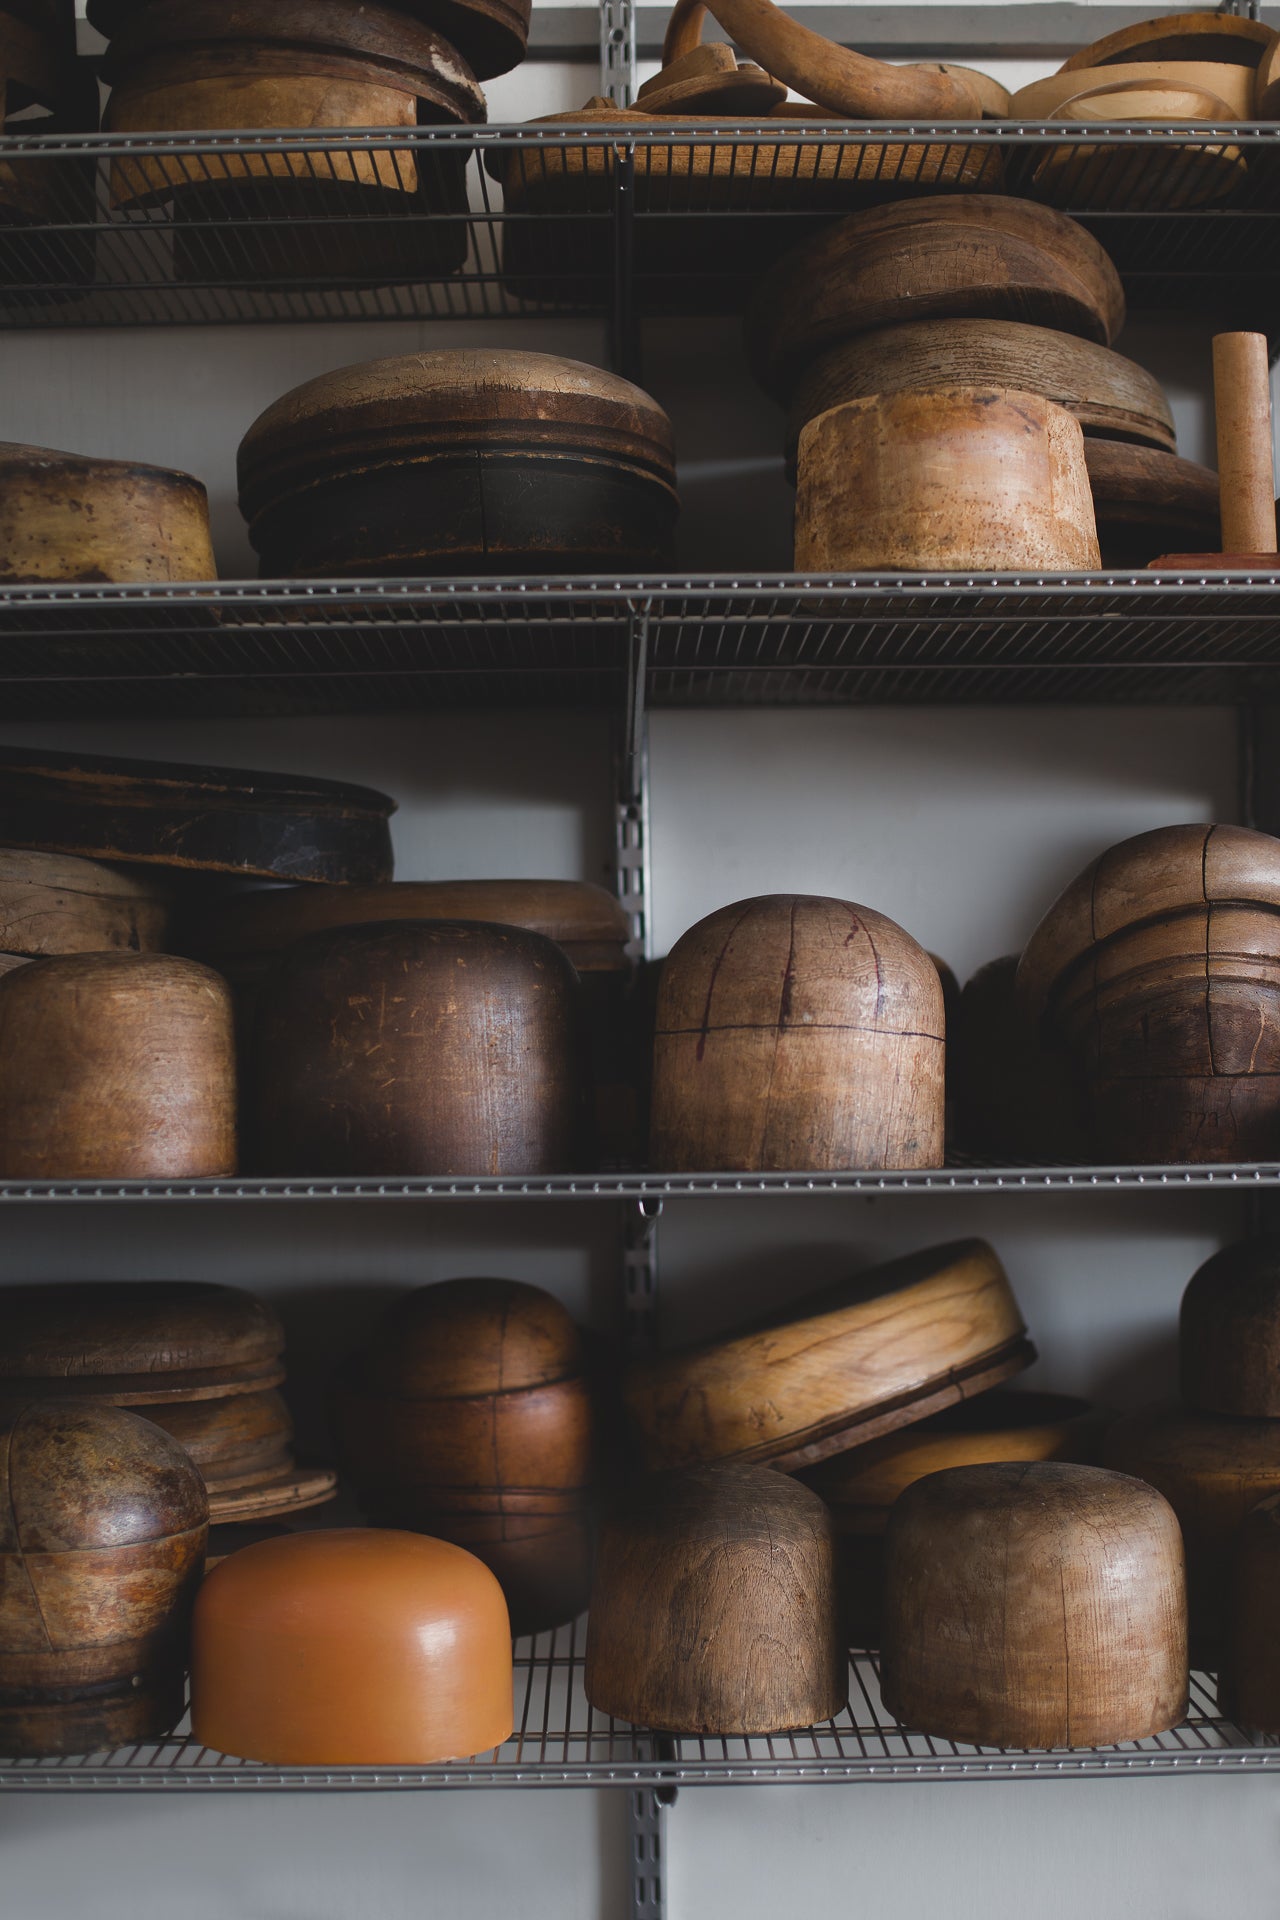 Wooden hat blocks from a millinery studio in Montreal